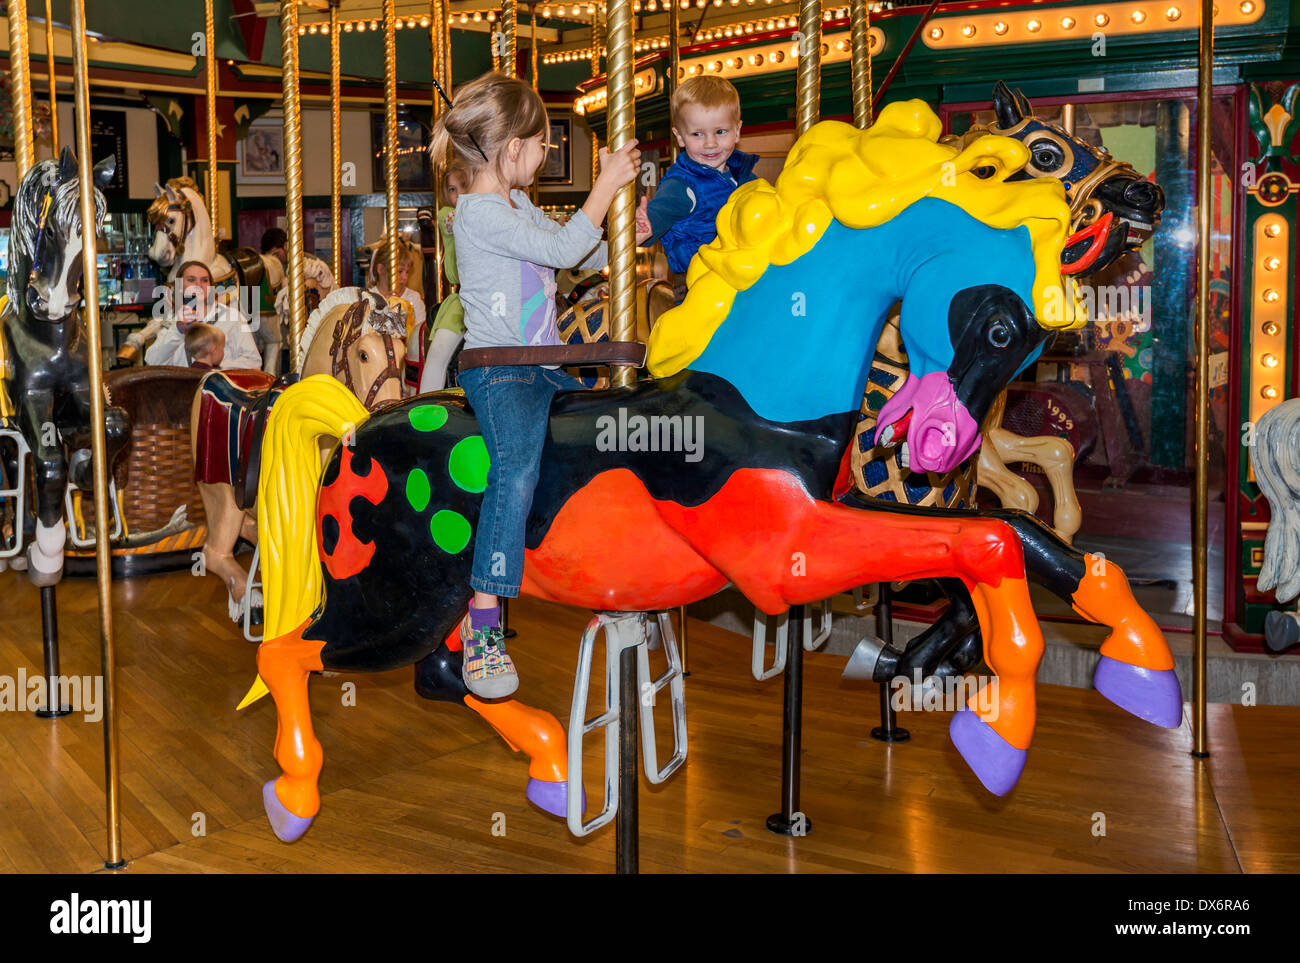 Young riders on carousel horses at Carousel for Missoula amusement park in Missoula, Montana, USA Stock Photo